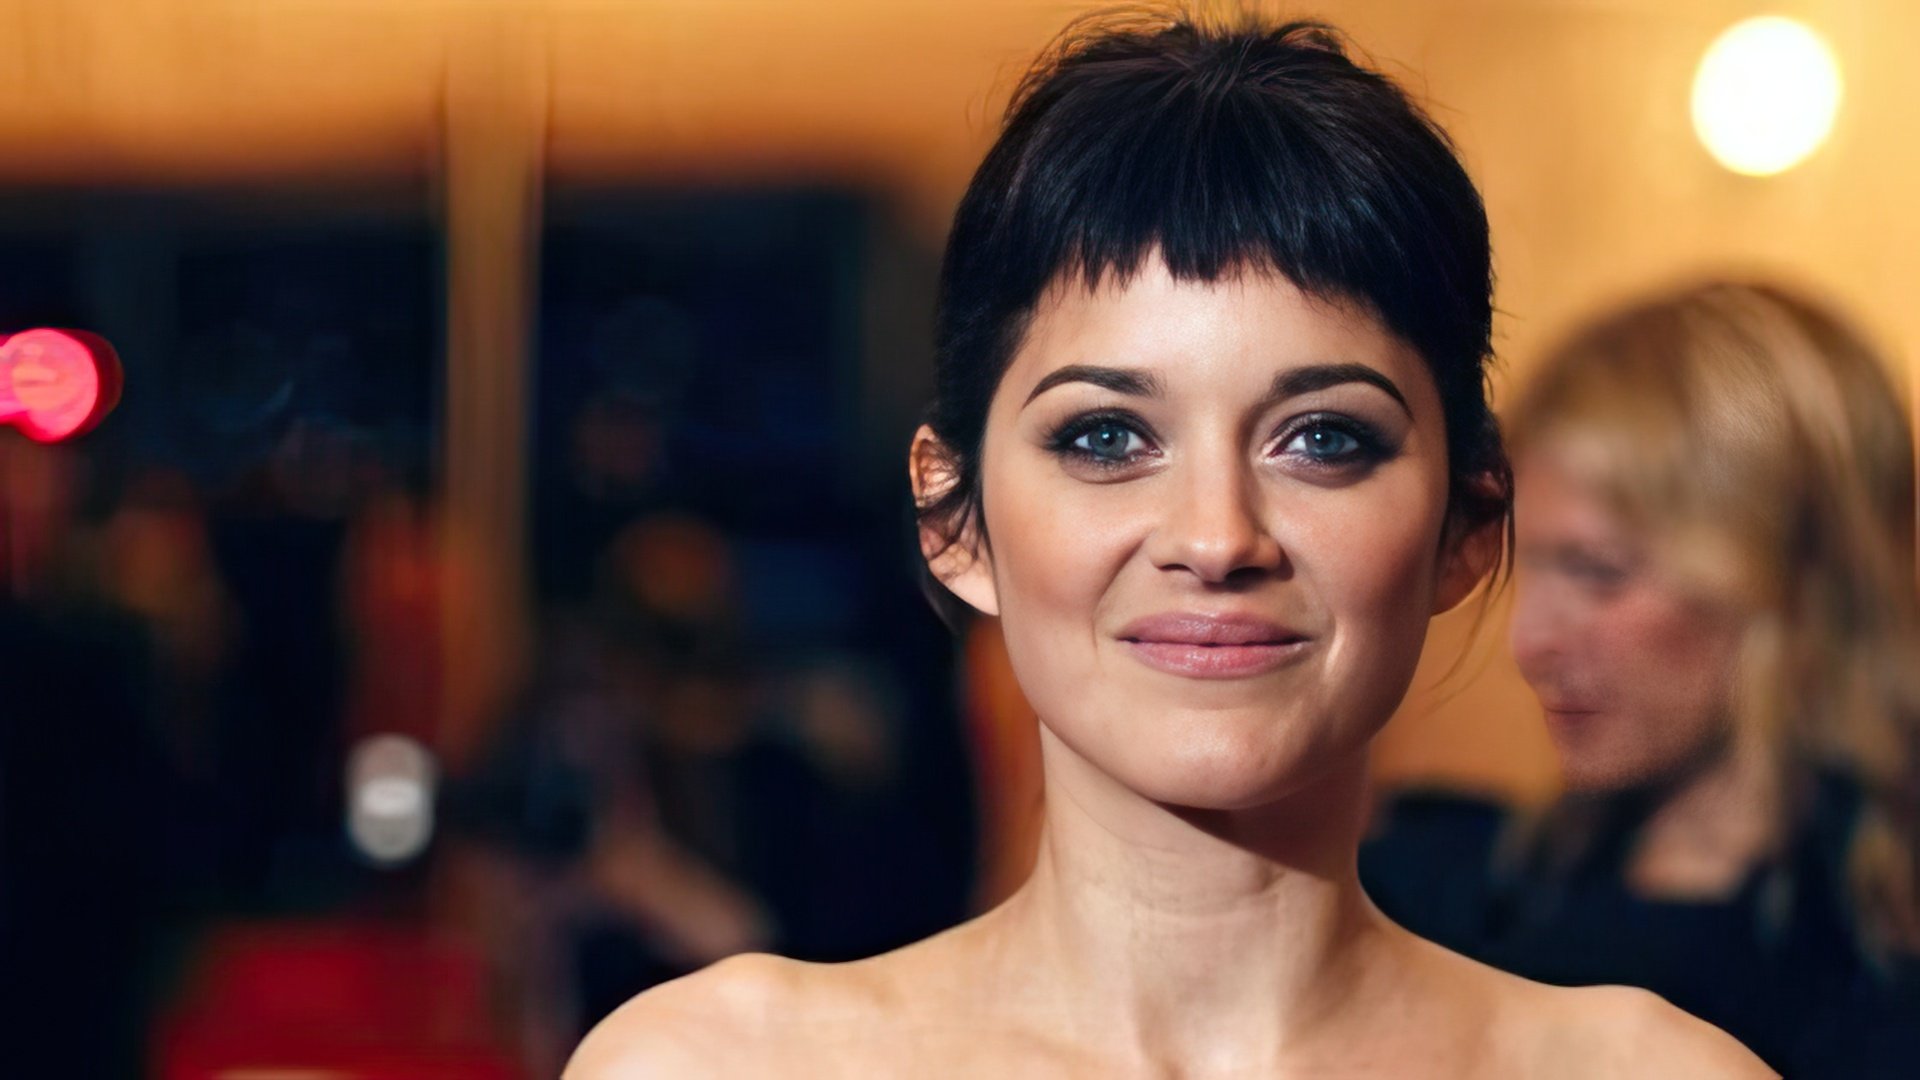 Marion Cotillard was born into a very artistic family